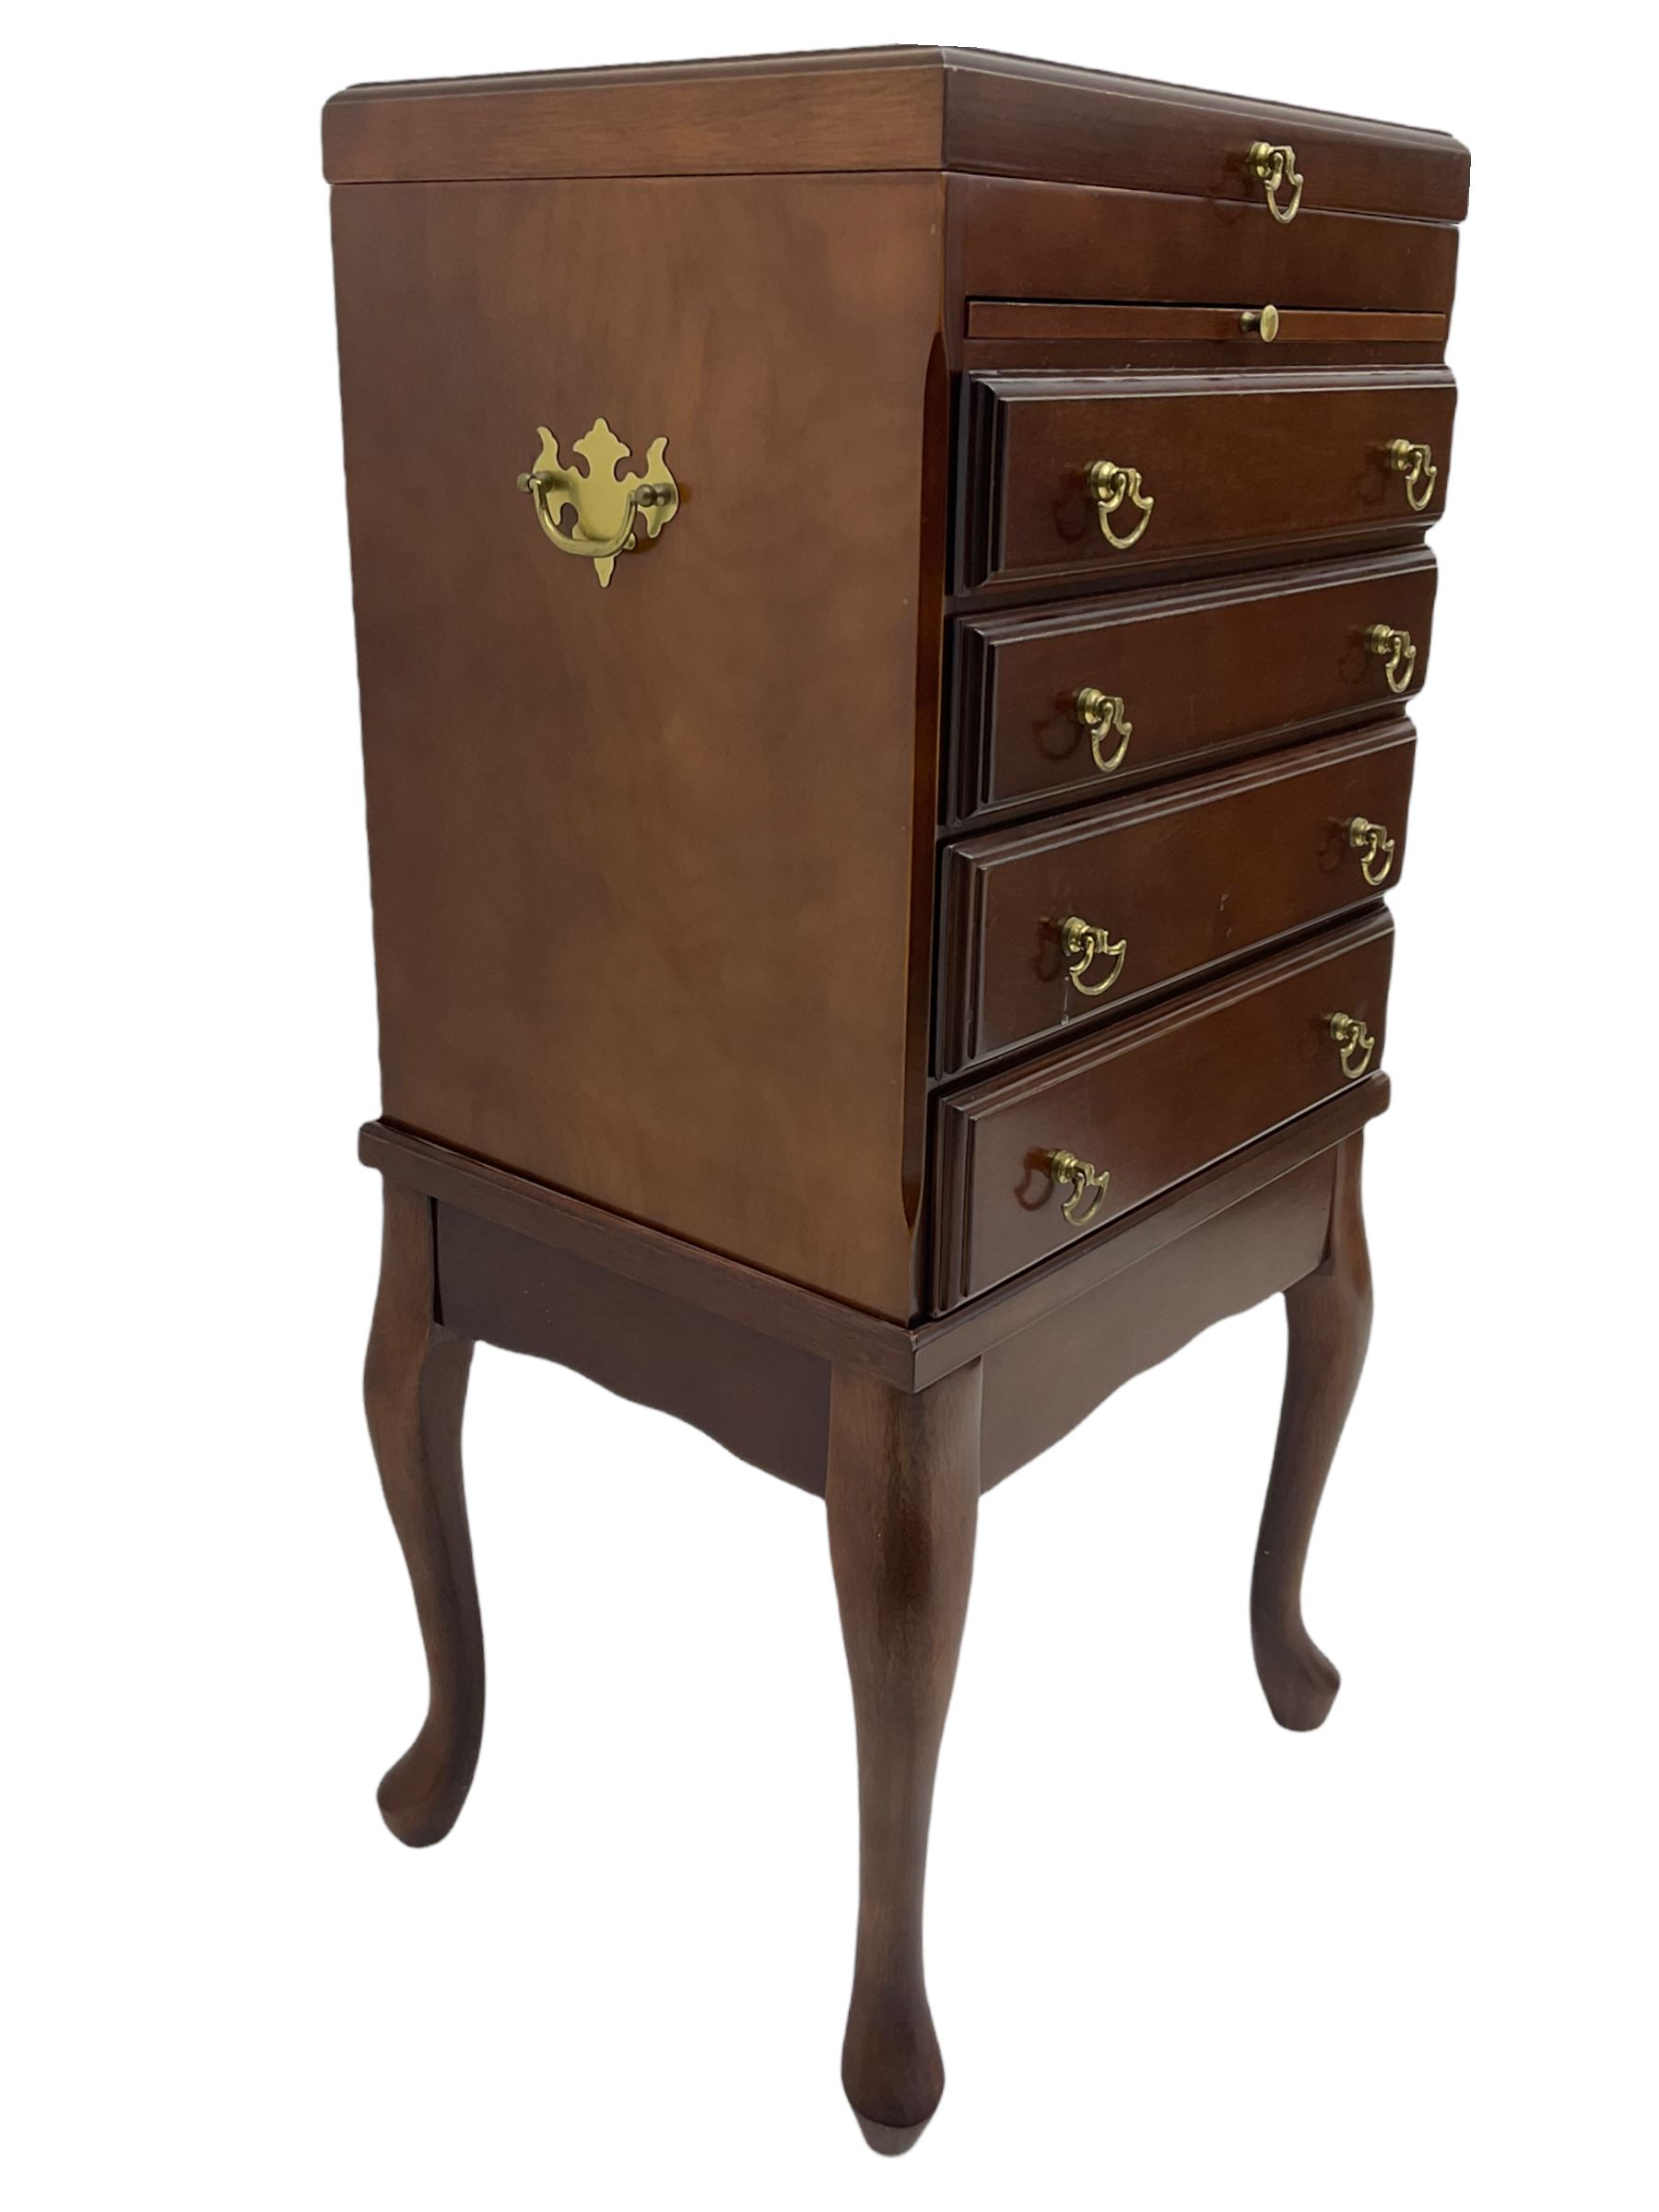 Mahogany pedestal chest on stand - Image 6 of 6